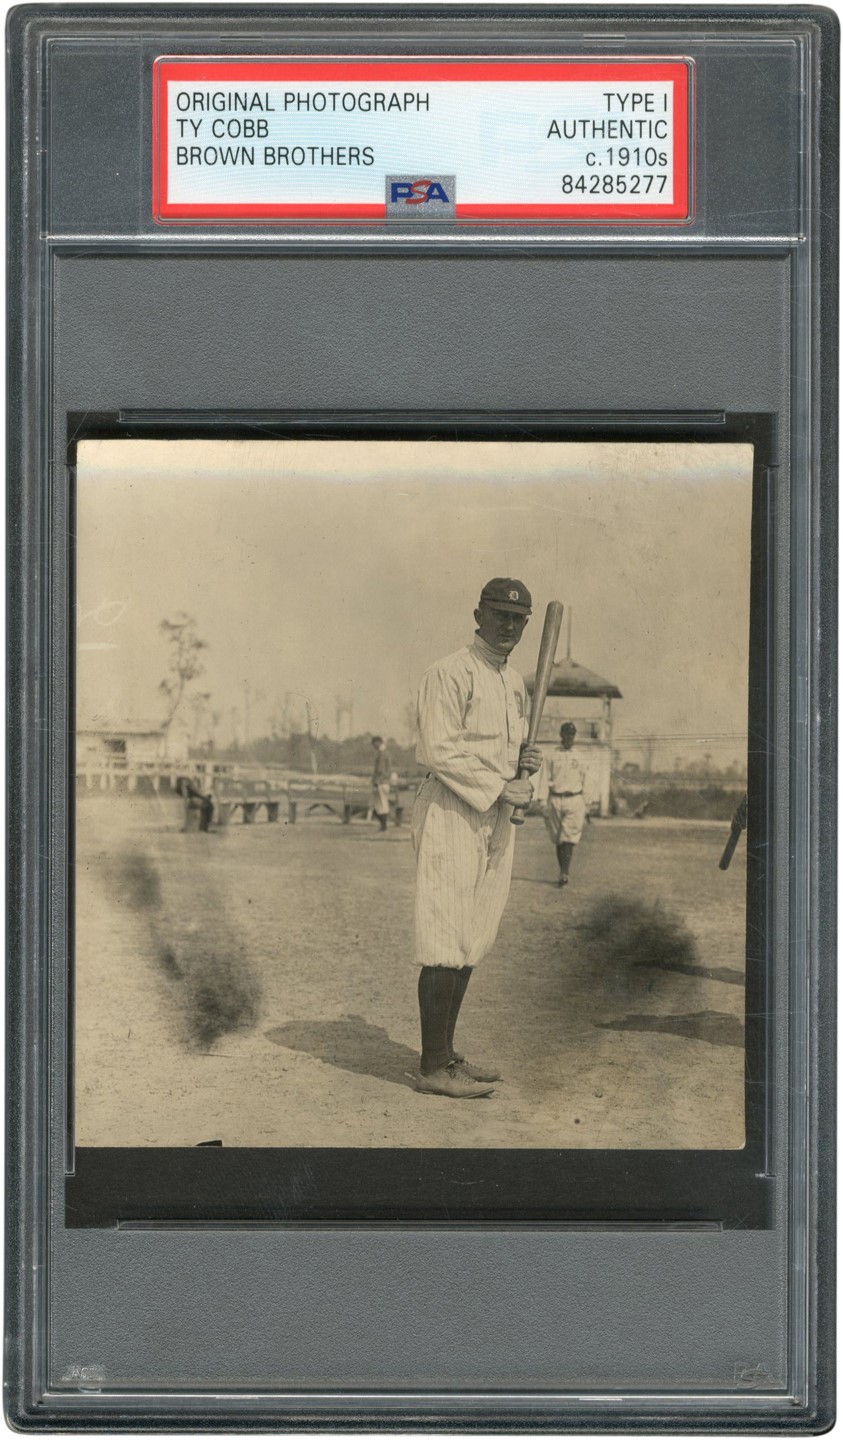 Ty Cobb Posed with Bat Photograph (PSA Type I)